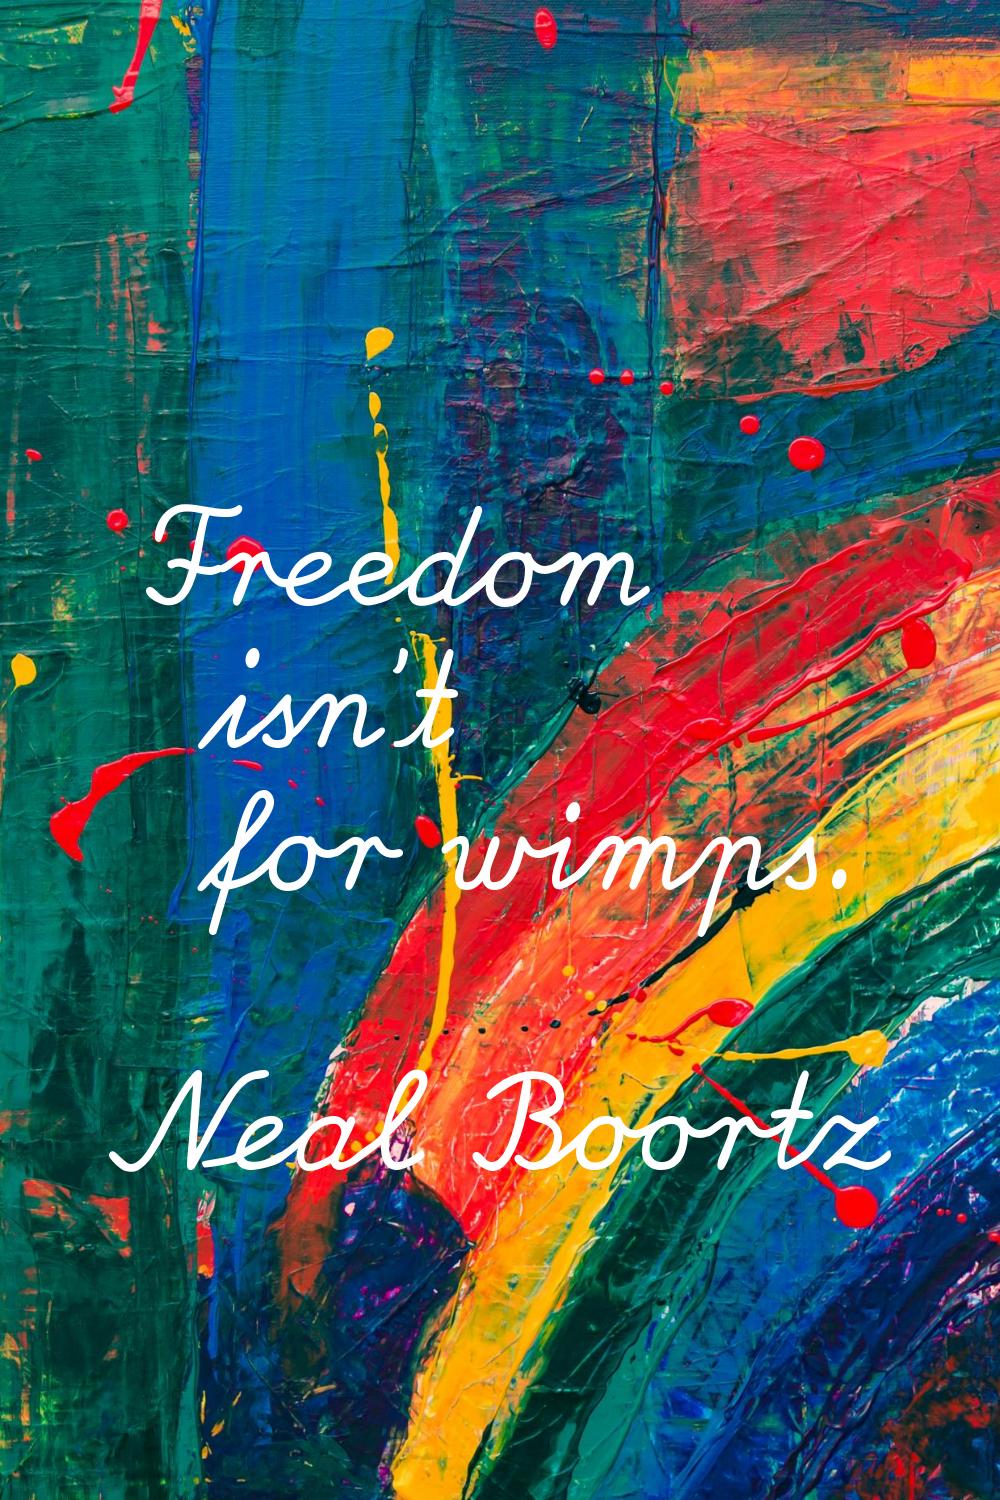 Freedom isn't for wimps.